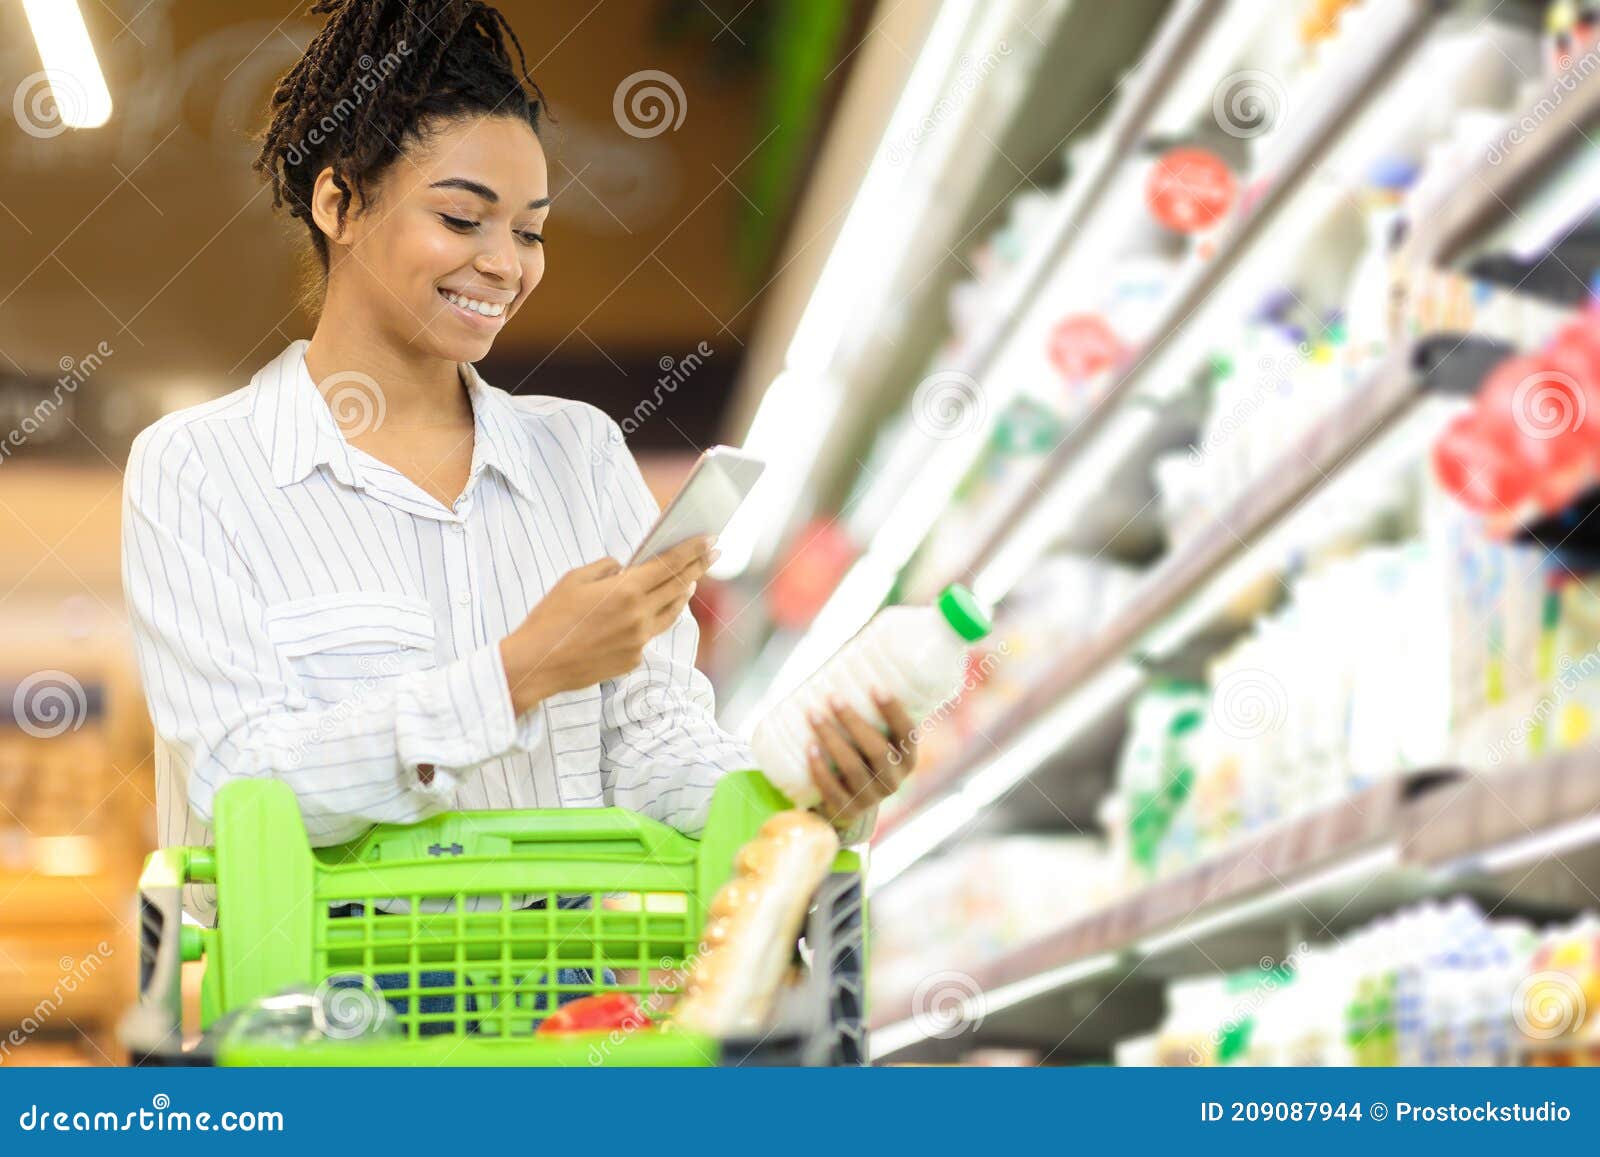 Happy African Lady Scanning Product on Grocery Shopping in Supermarket ...